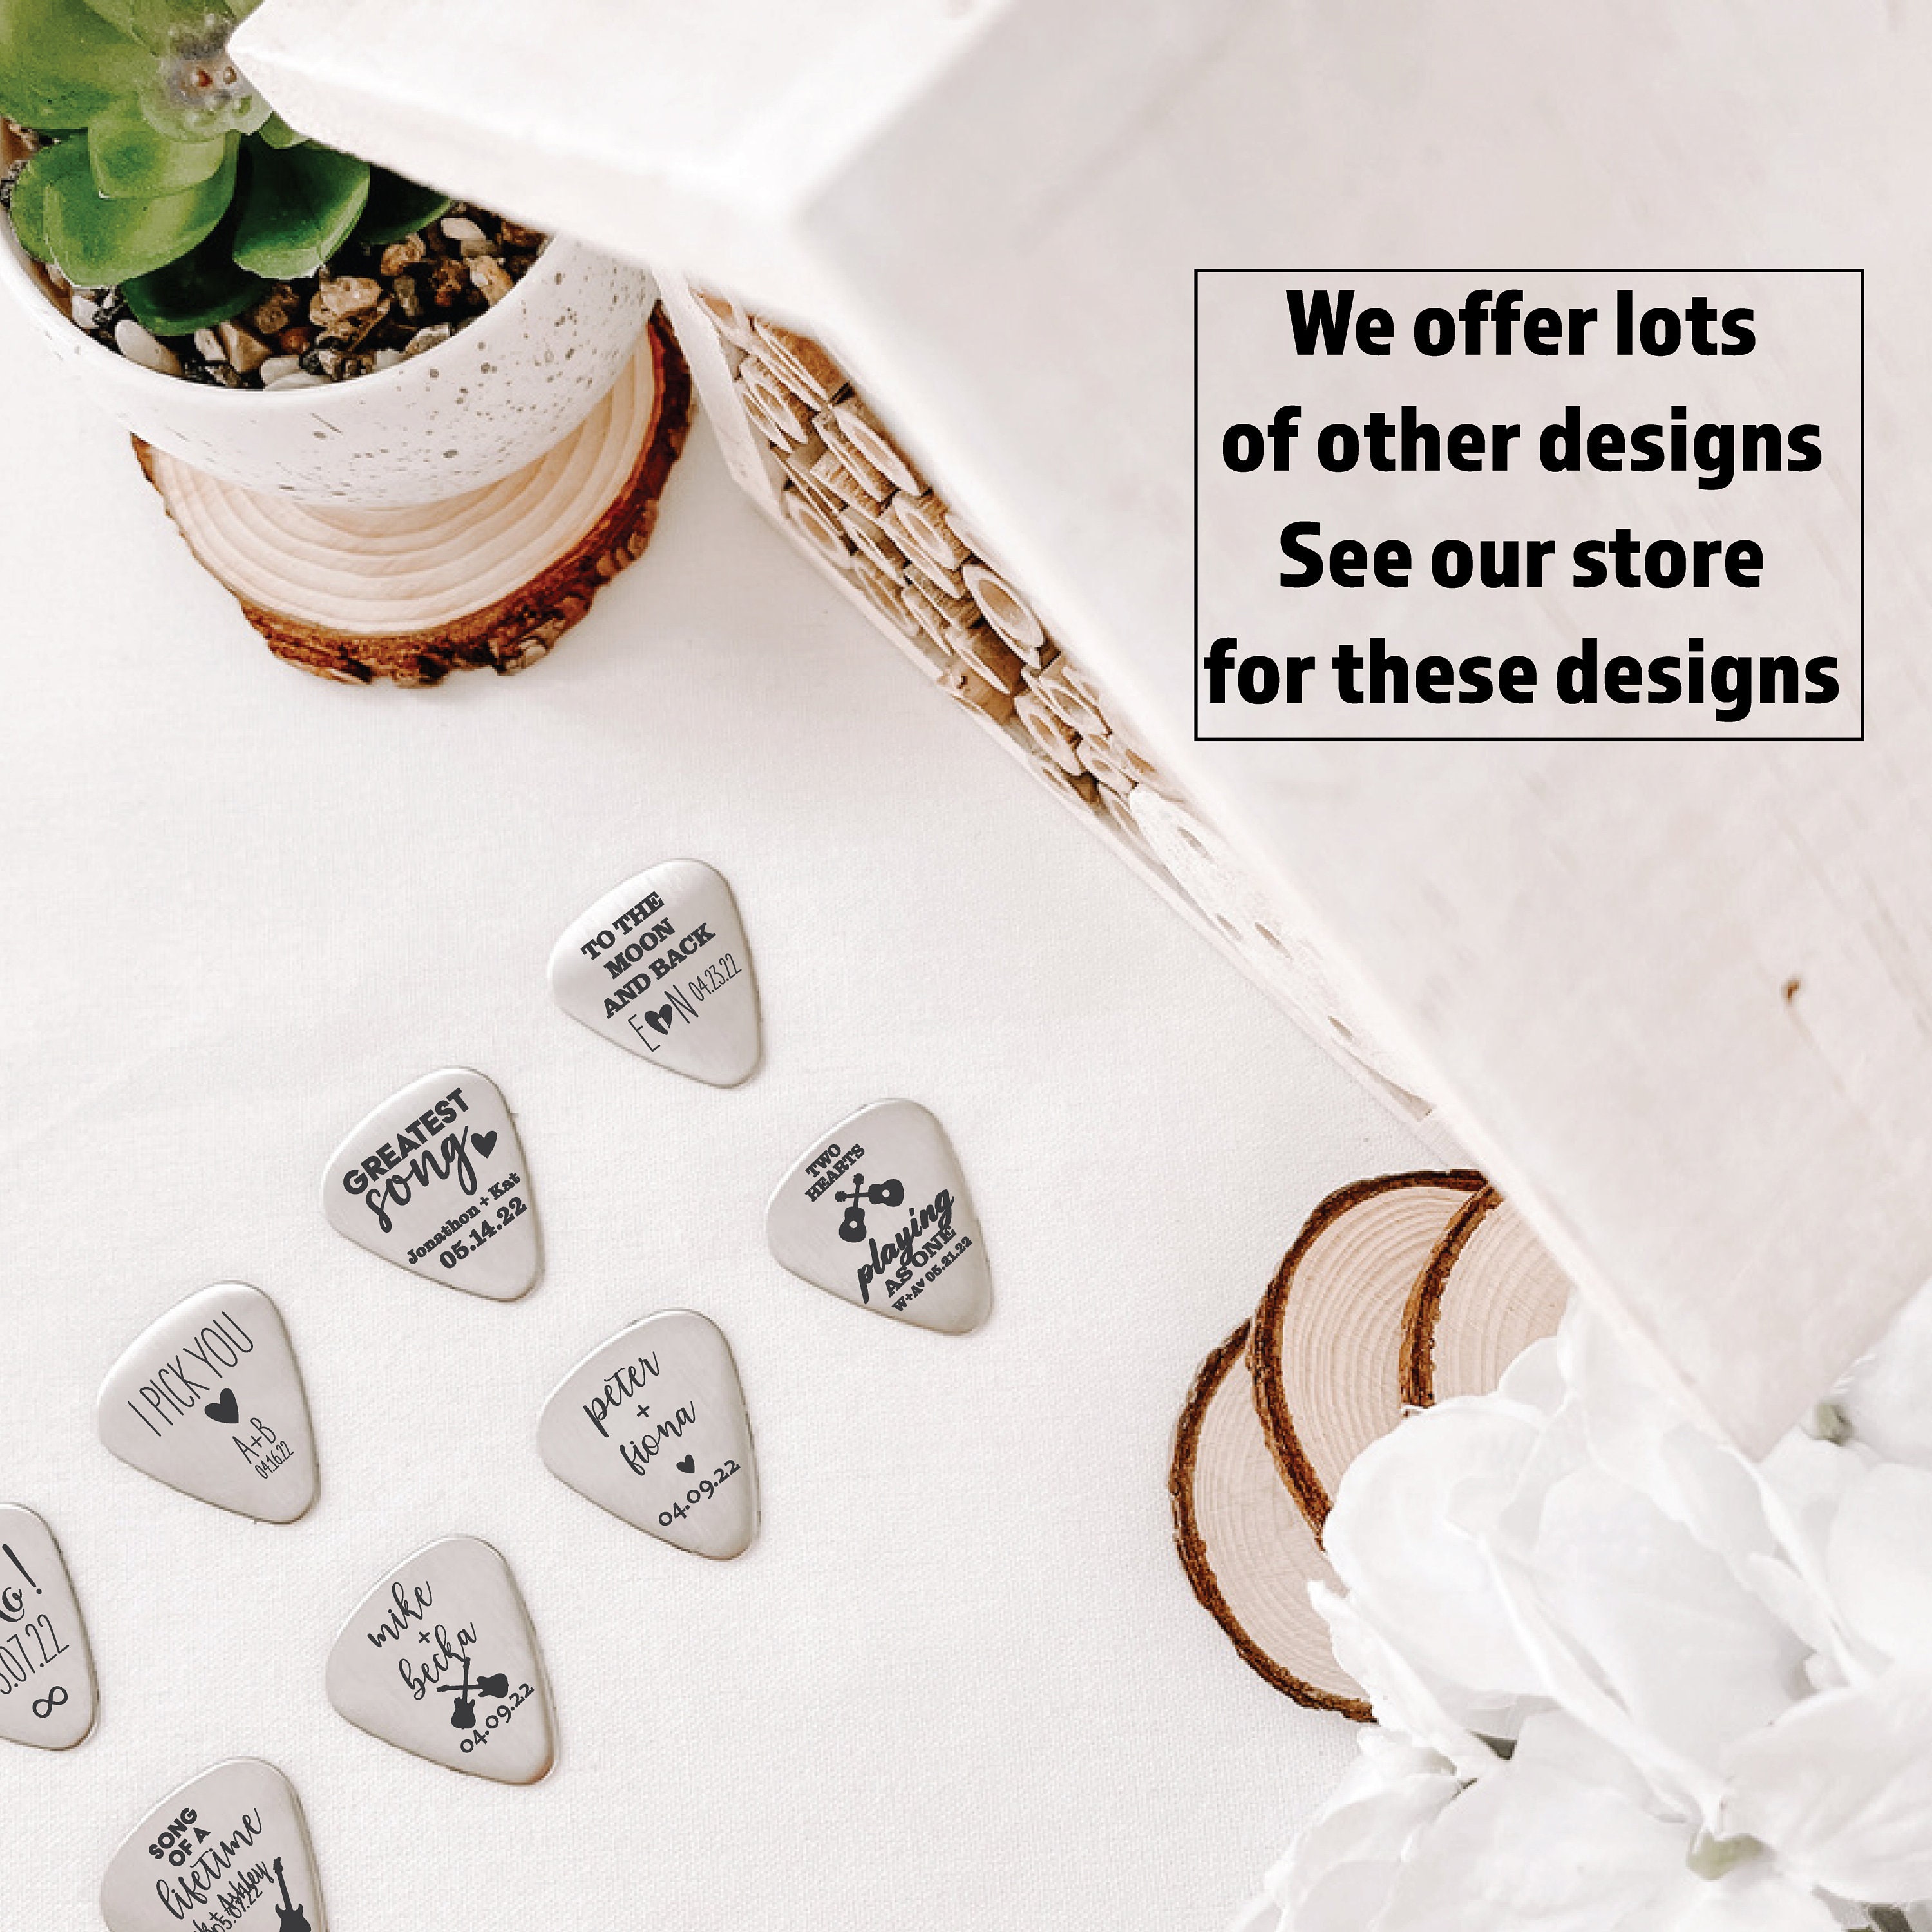 Personalized Guitar Pick Wedding Favors for Guests Personalized Wedding Favor Guitar Pick Personalized Guitar Bulk Music Wedding Lifetime